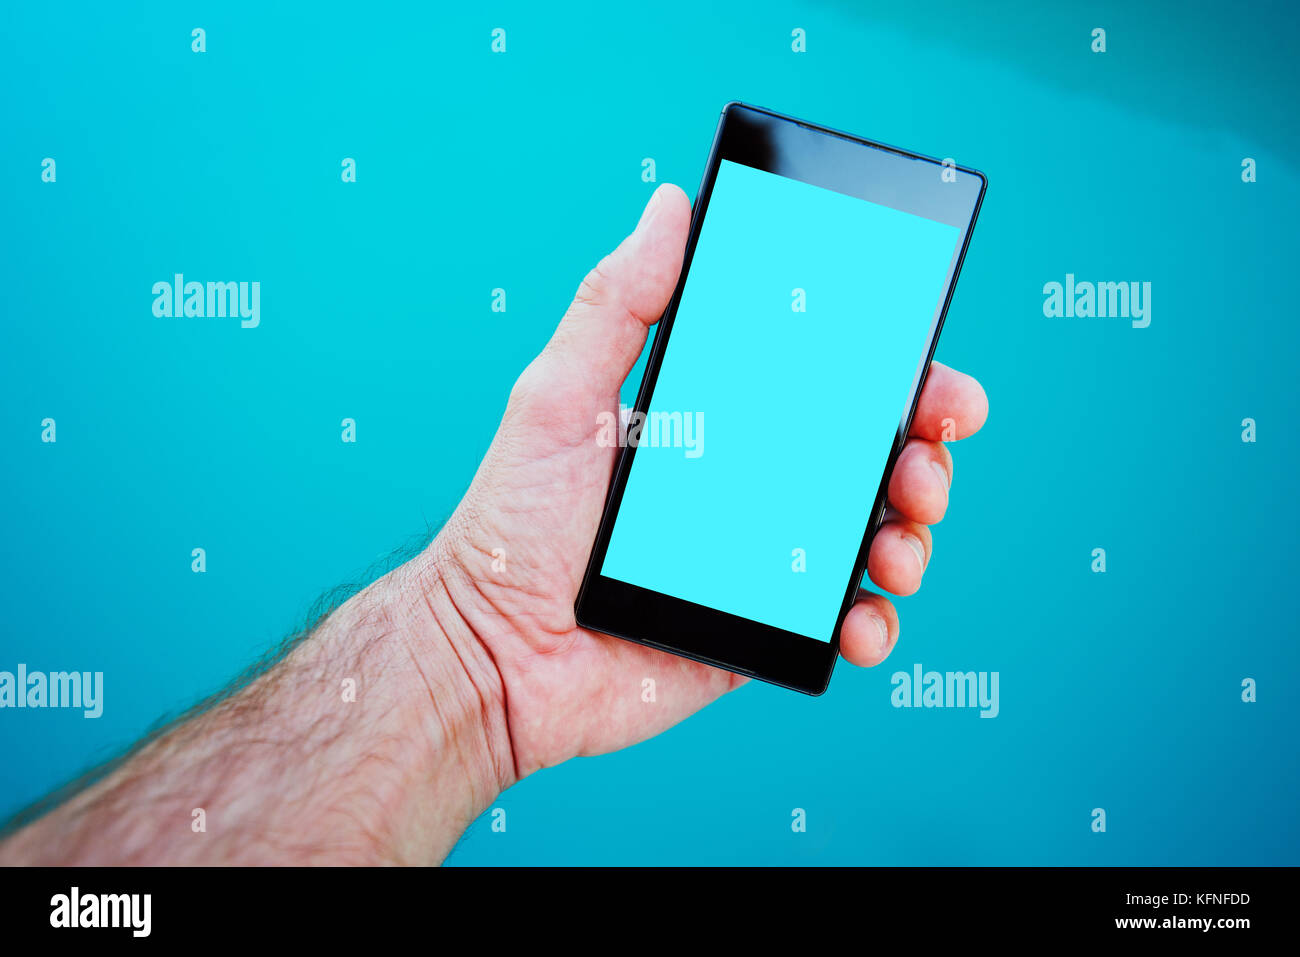 Swimming pool mobile phone app, smartphone device screen as mock up copy space Stock Photo